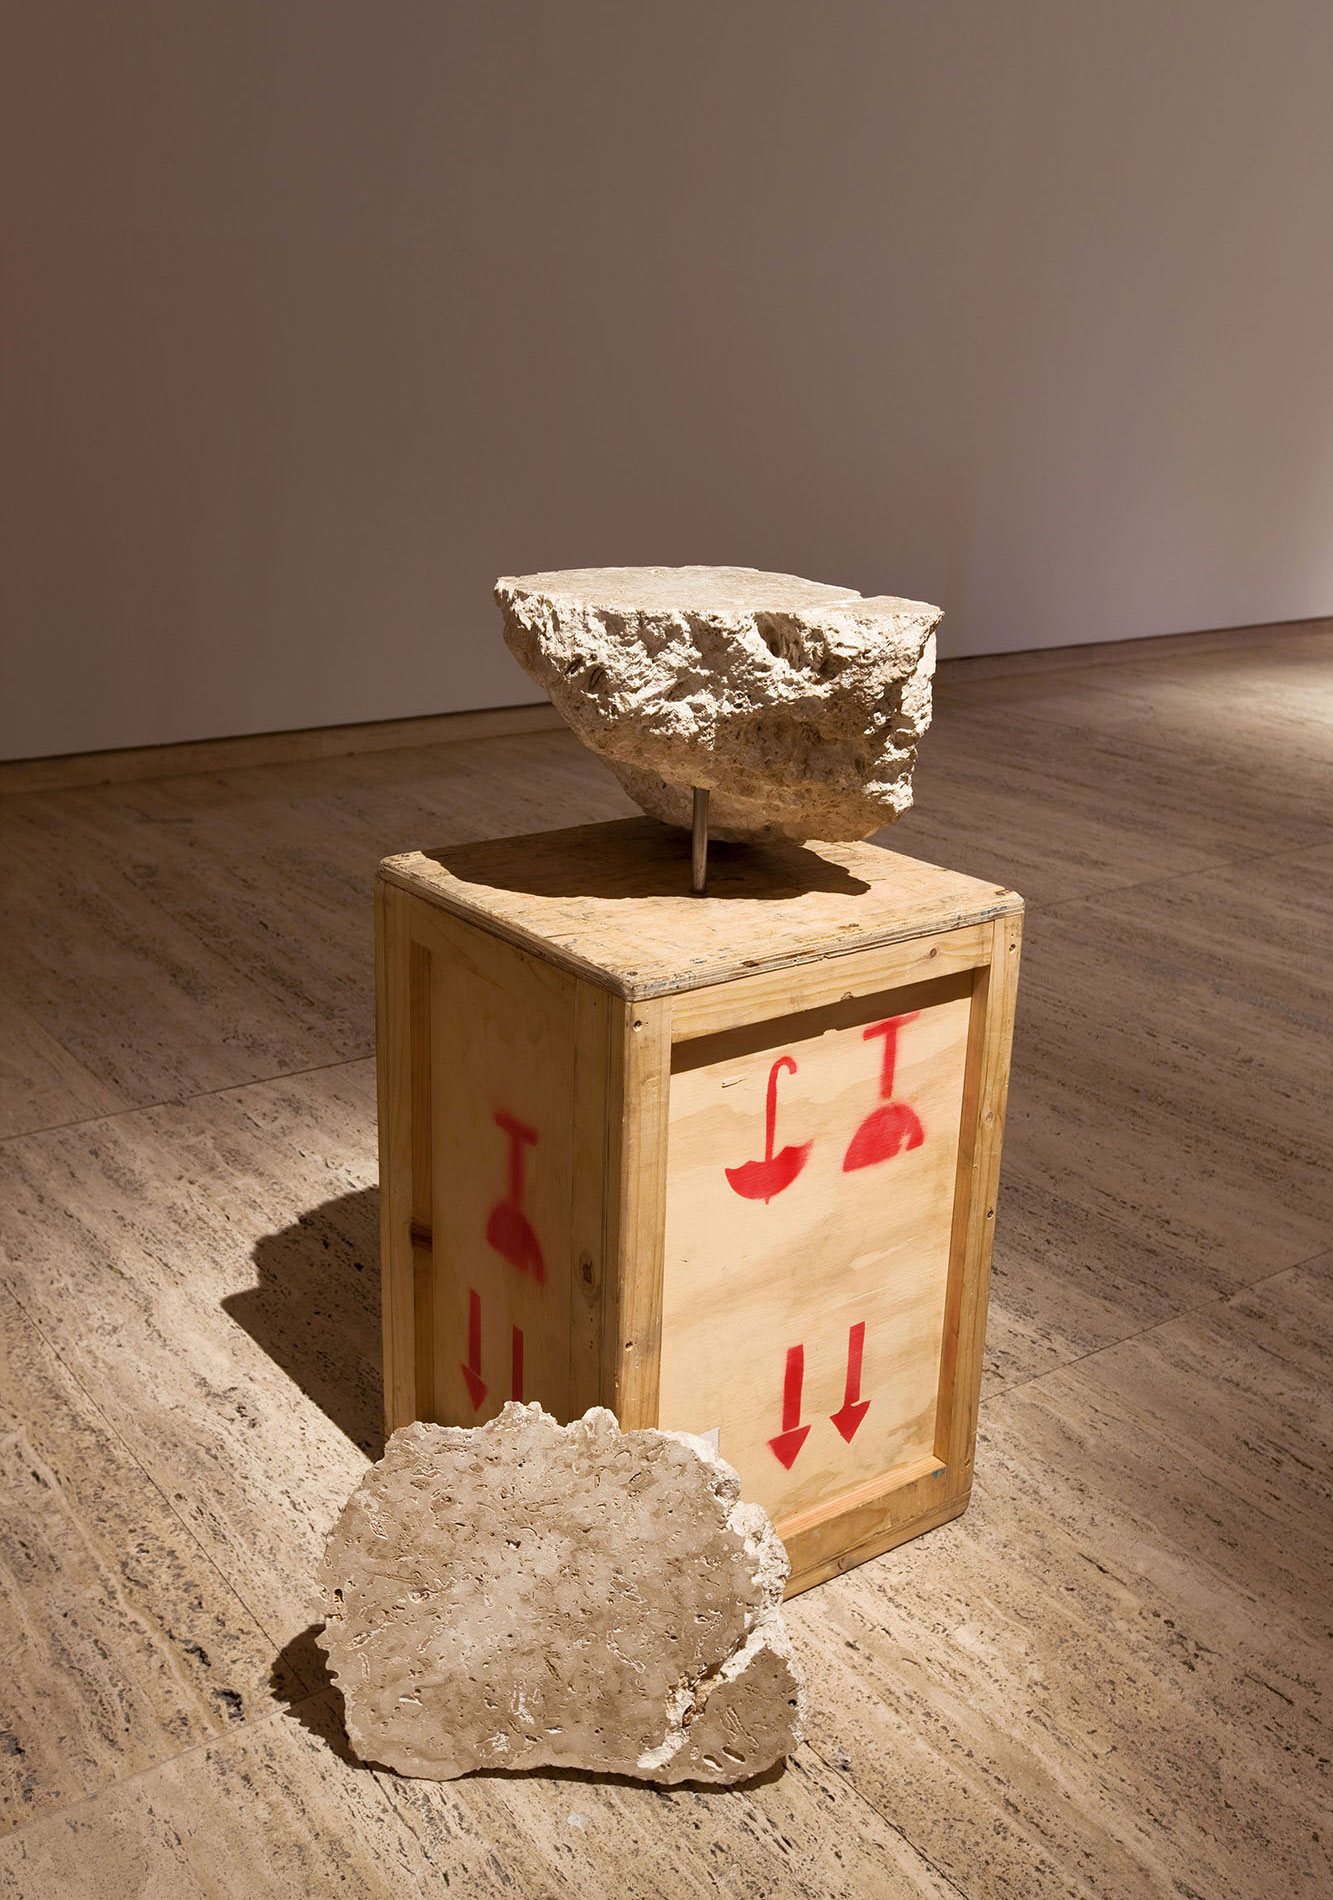 Nicholas Mangan, *Proposition for Dowiyogo’s Ancient Coral Coffee Table*, 2009, coral limestone from the island of Nauru, wooden travel crate, 60 × 60 × 95 cm. Installation detail, Between a Rock and a Hard Place, Art Gallery of New South Wales, Sydney, 2009. Photographer: Carley Wright.